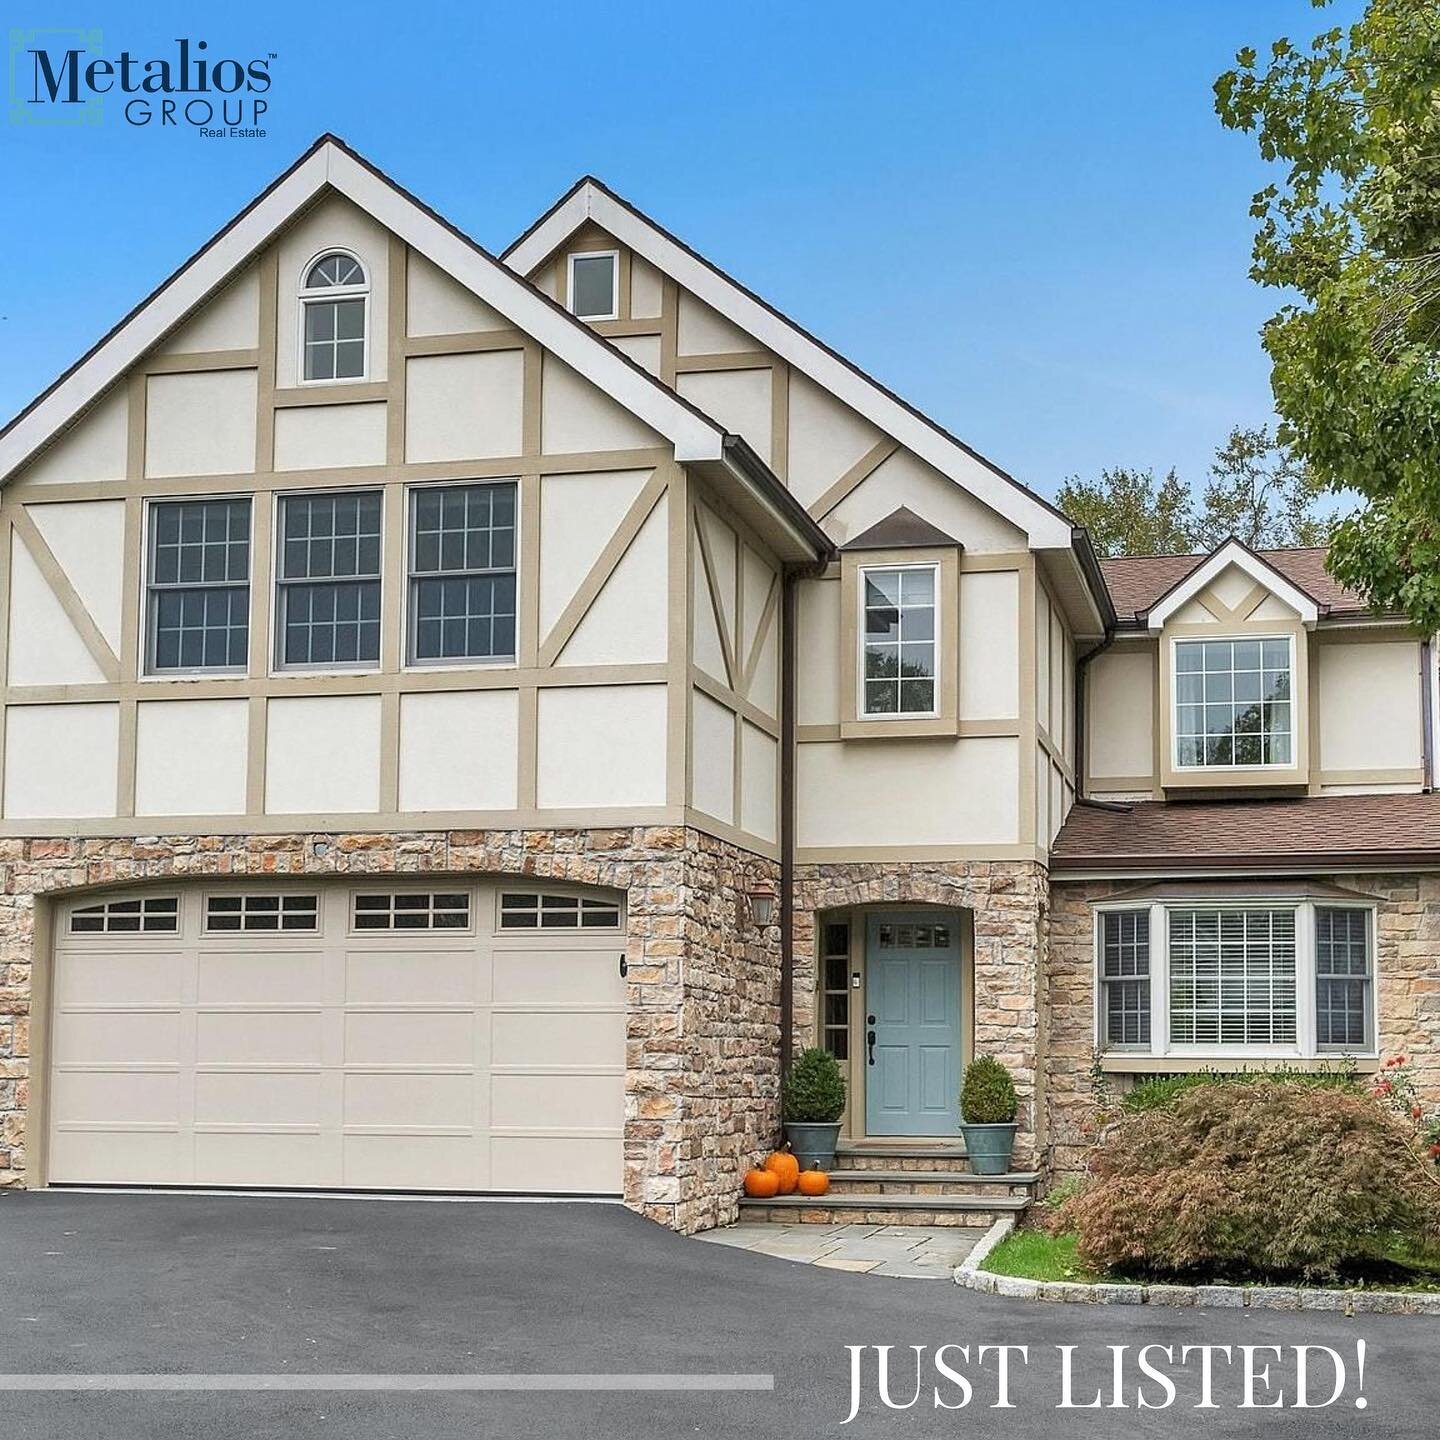 💫JUST LISTED! The gorgeous 23 Griffith Rd, in Riverside CT 🏡 

The newly renovated kitchen features granite countertops, Carrara marble backsplash, an open breakfast nook with bench seating, and a sliding door to the back patio.  Just through an ar